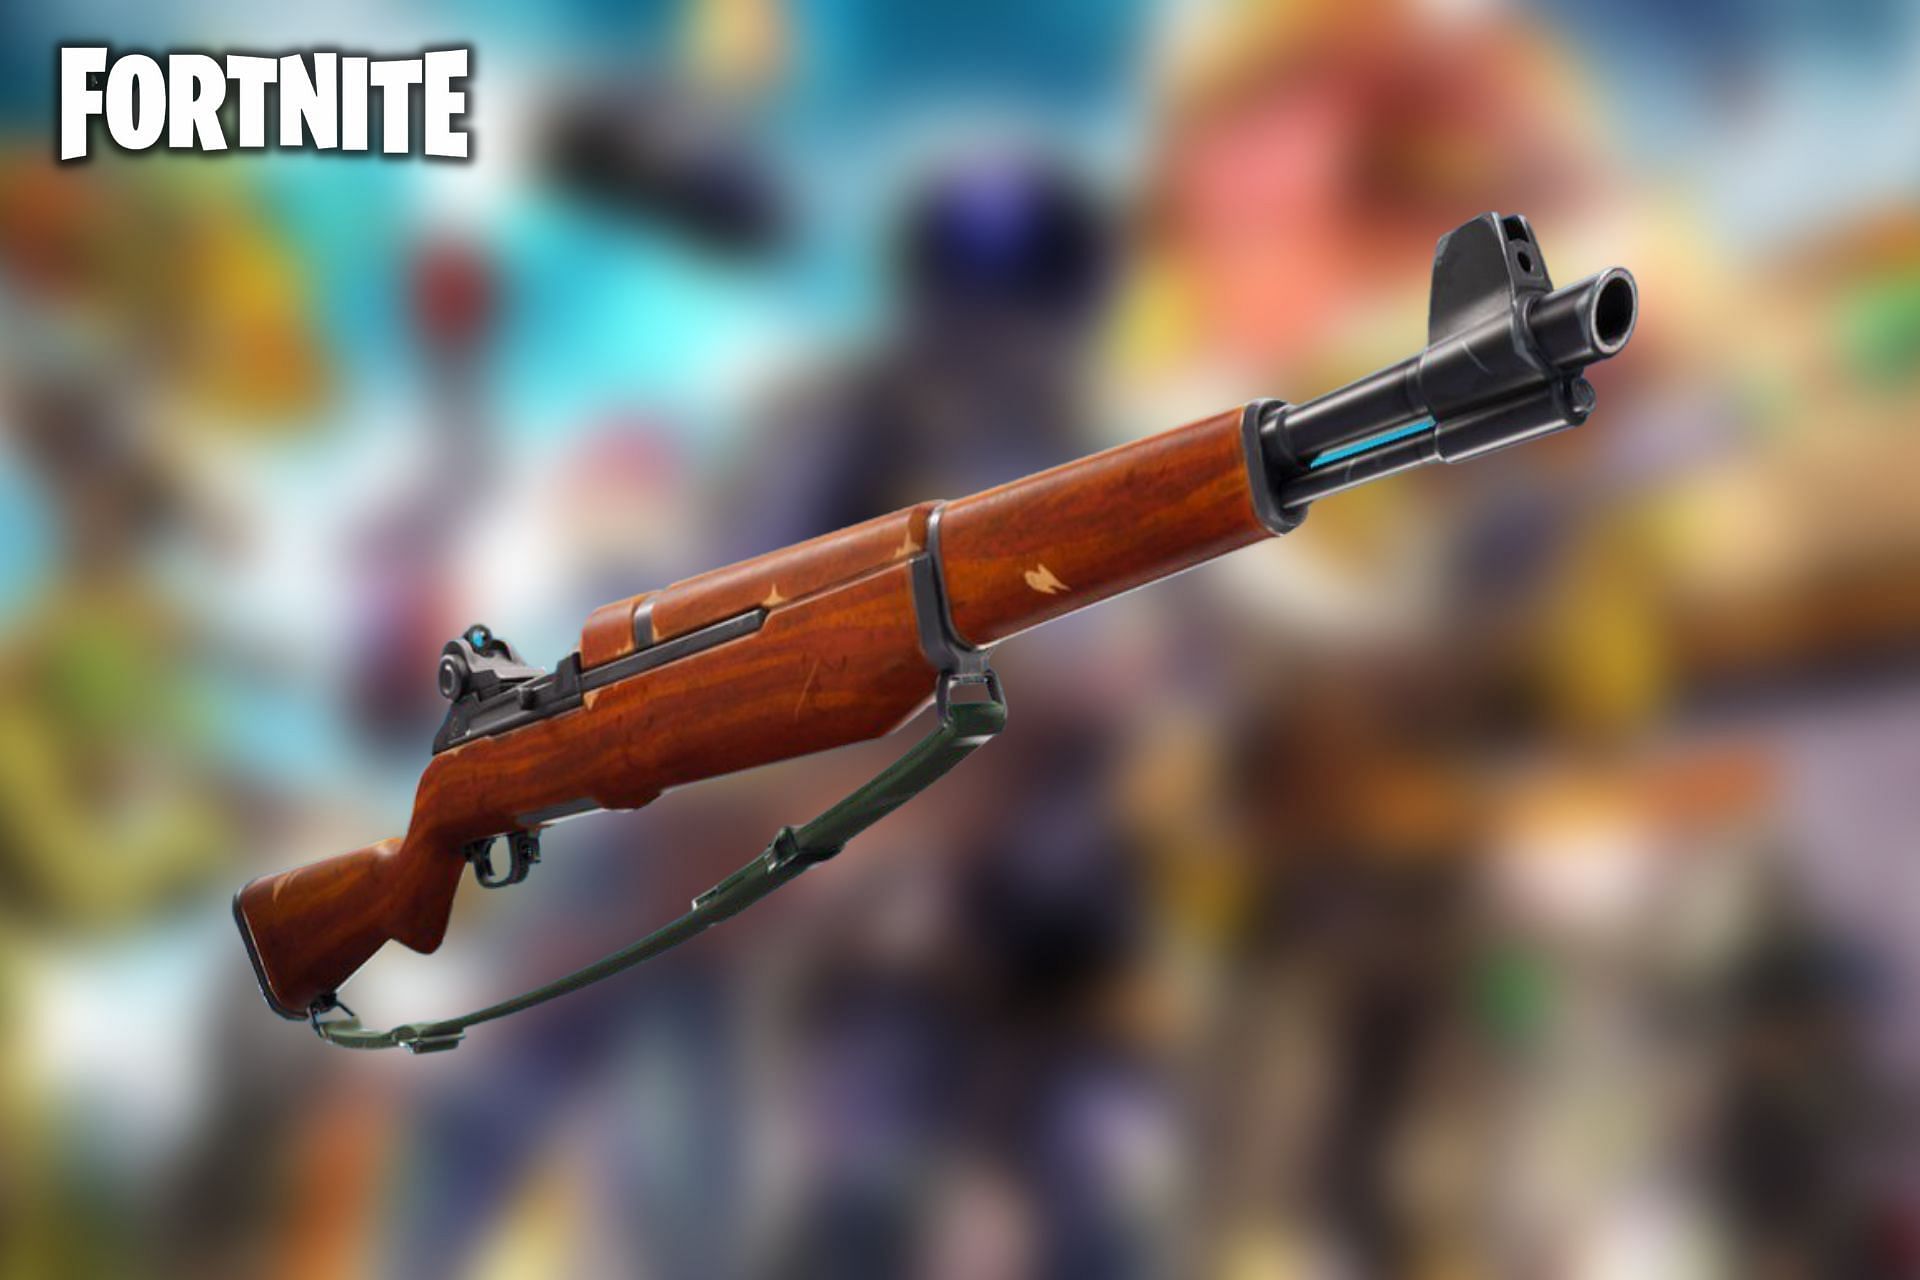 The Hunting Rifle is coming back to Fortnite in Chapter 3 Season 2 (Image via Sportskeeda)